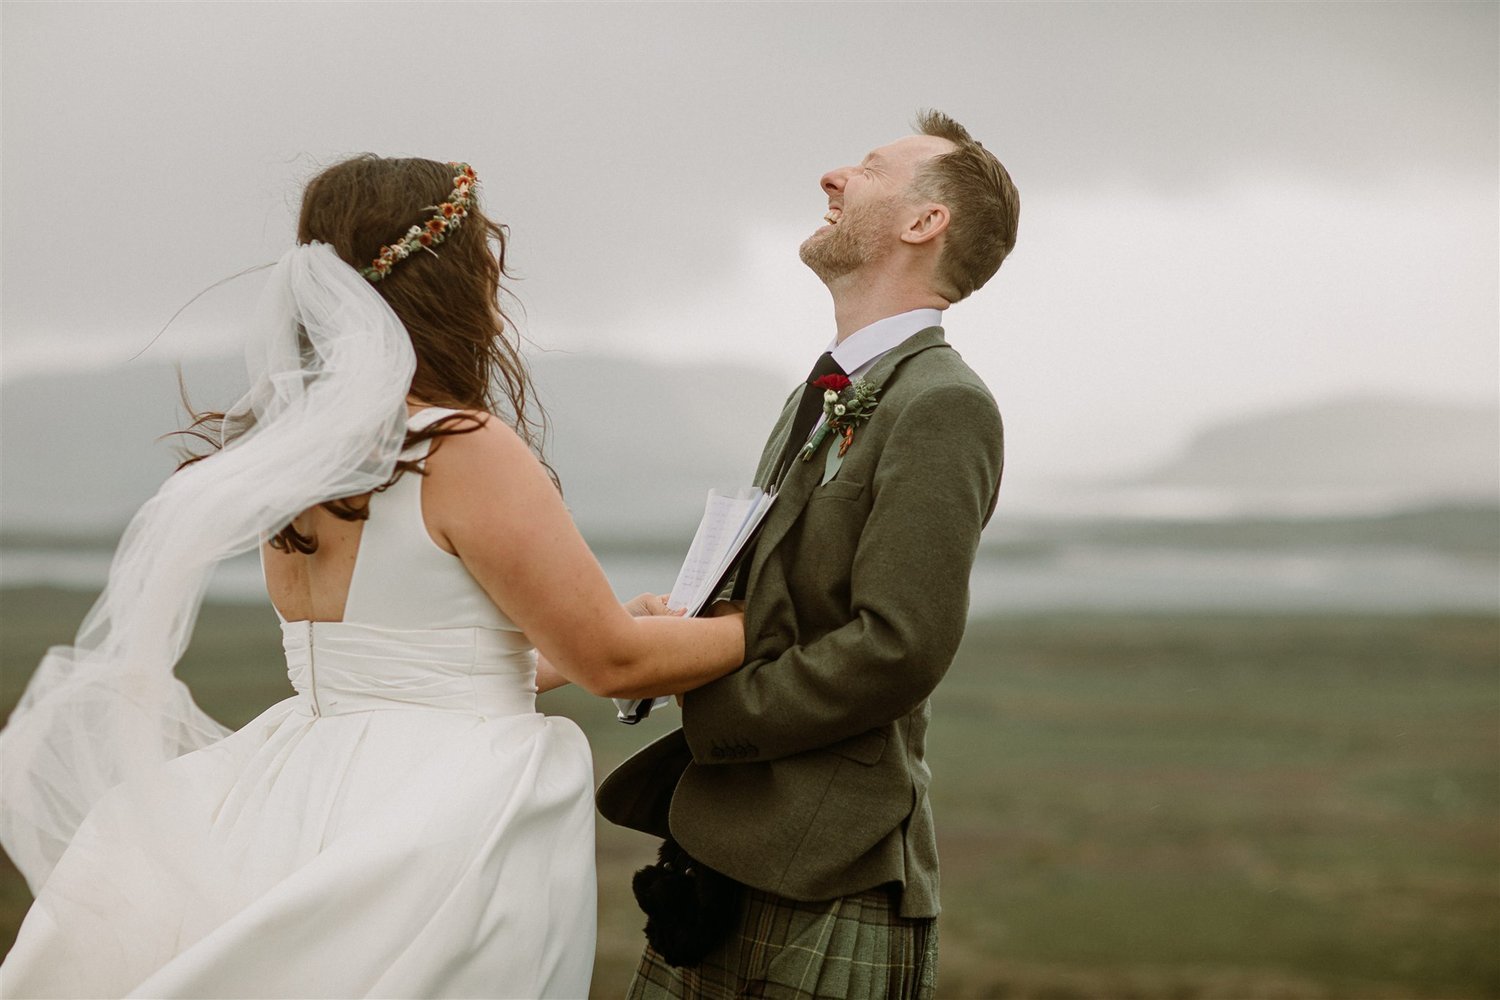 Funny elopement vows in Iceland.jpg